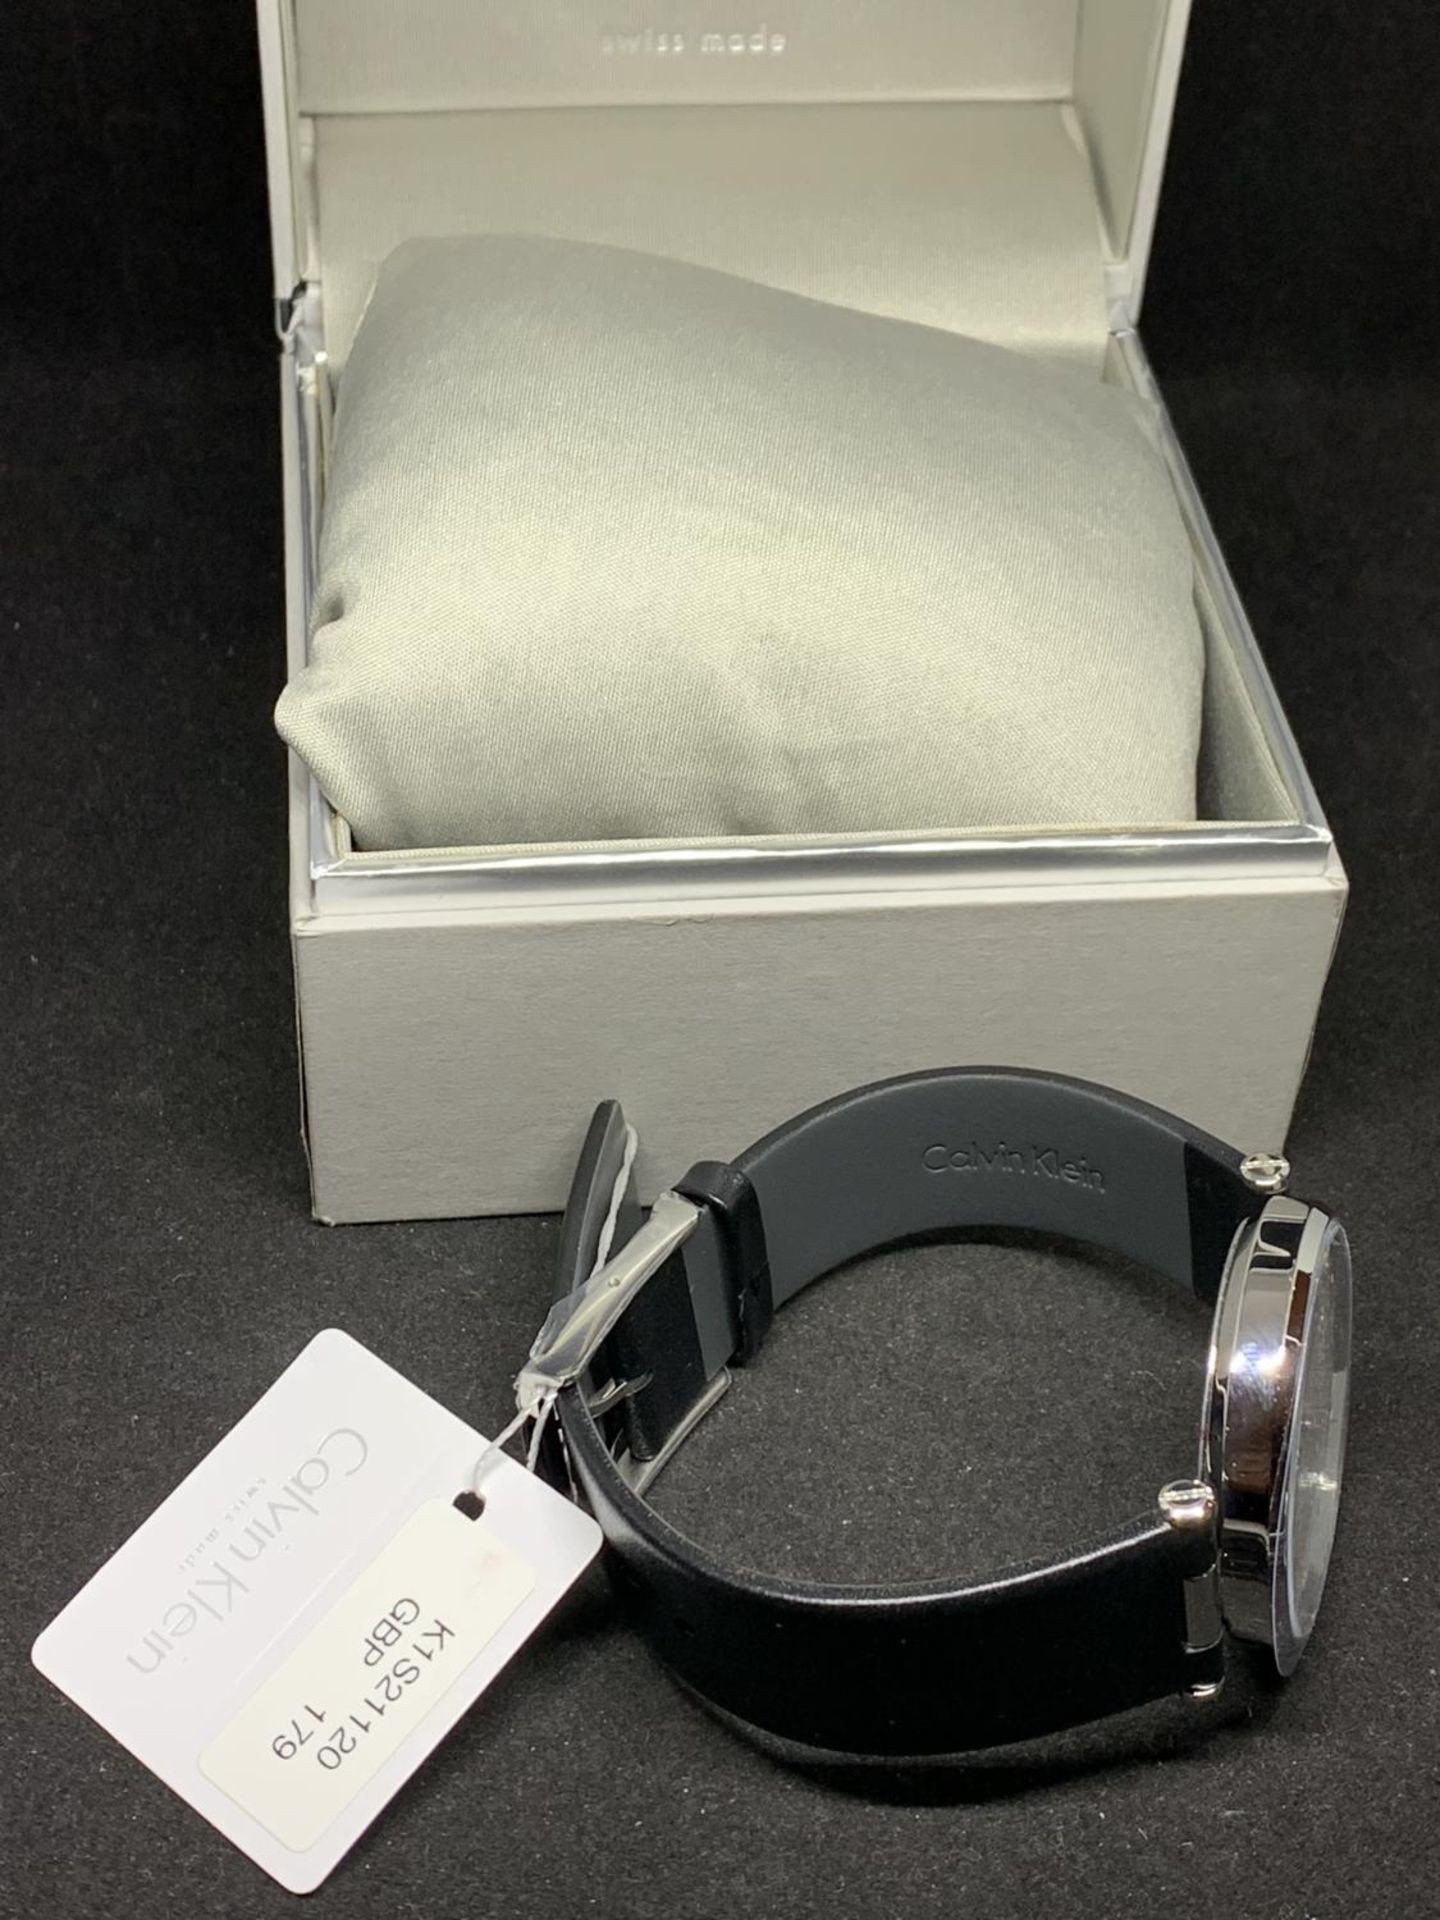 AN AS NEW AND BOXED CALVIN KLEIN CALENDER WRIST WATCH IN WORKING ORDER - Image 3 of 5